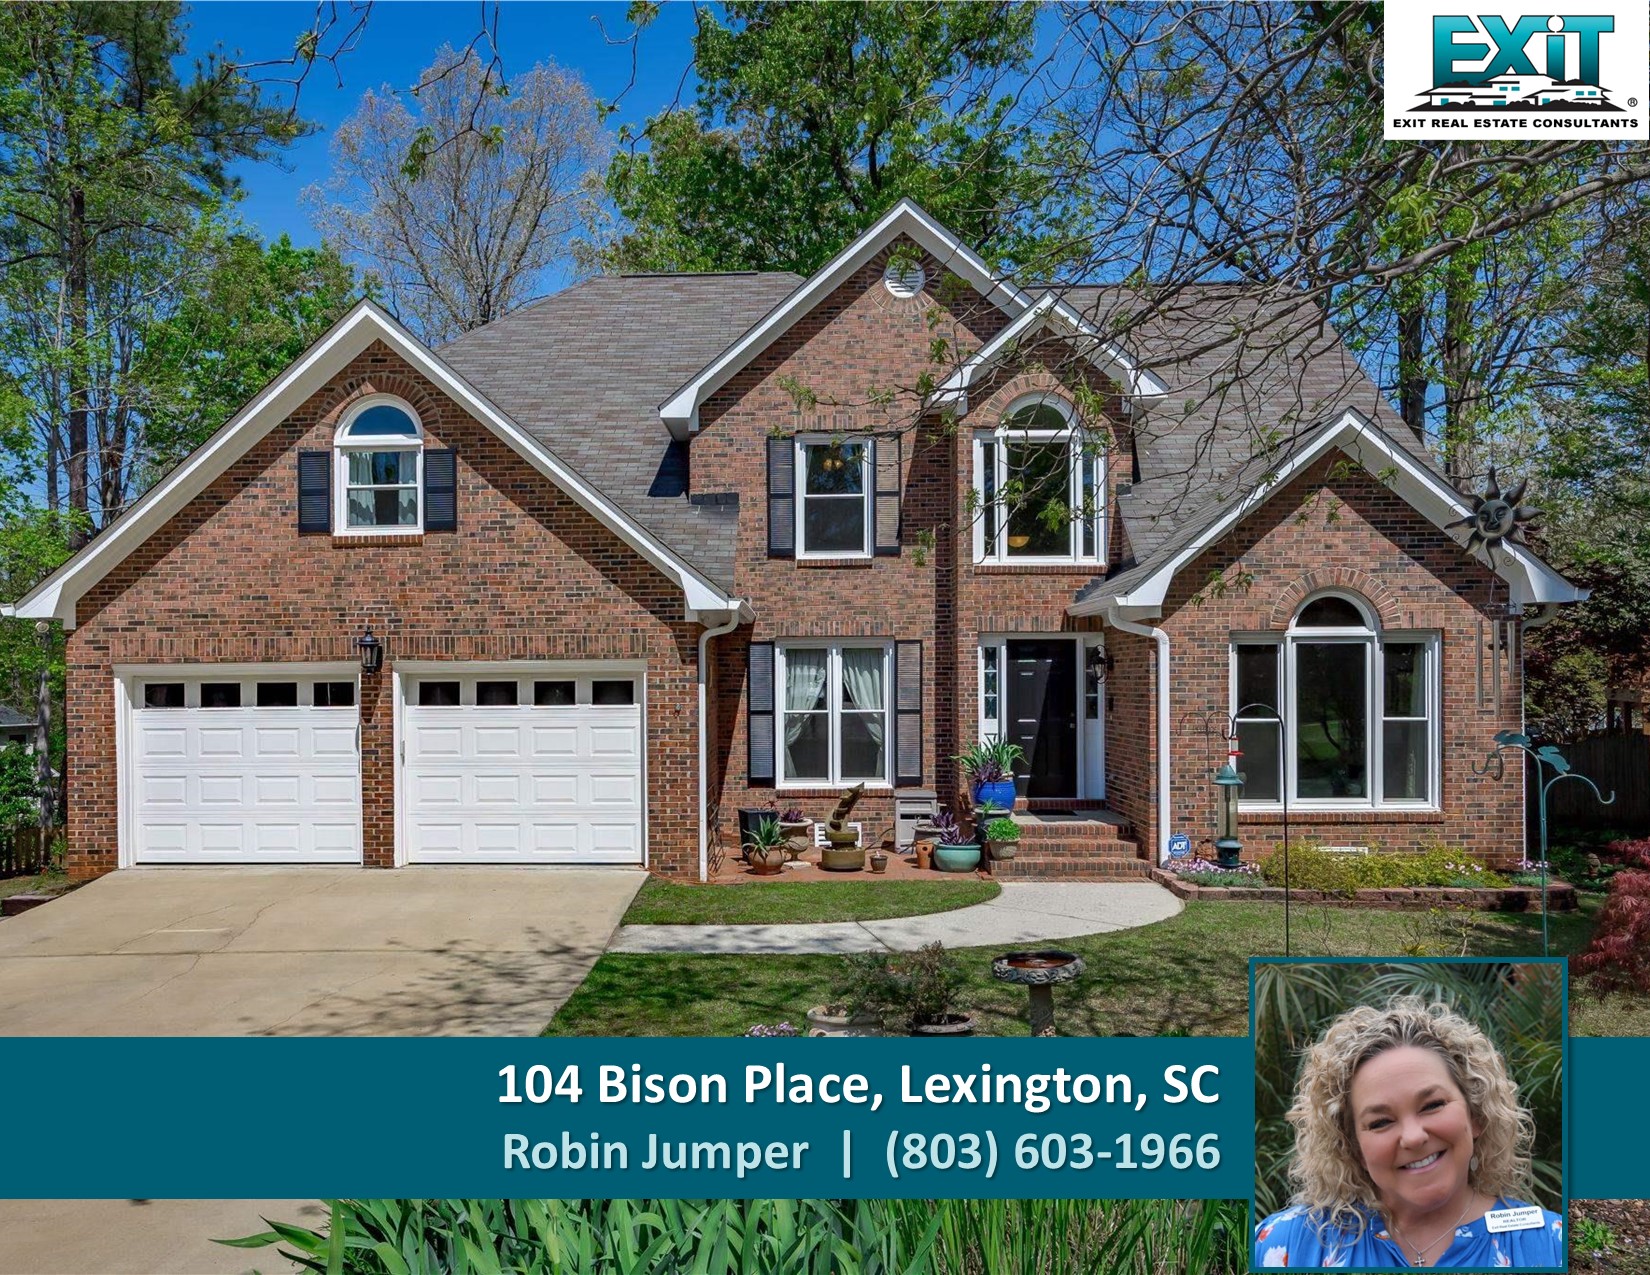 Just listed in Bent Creek Plantation